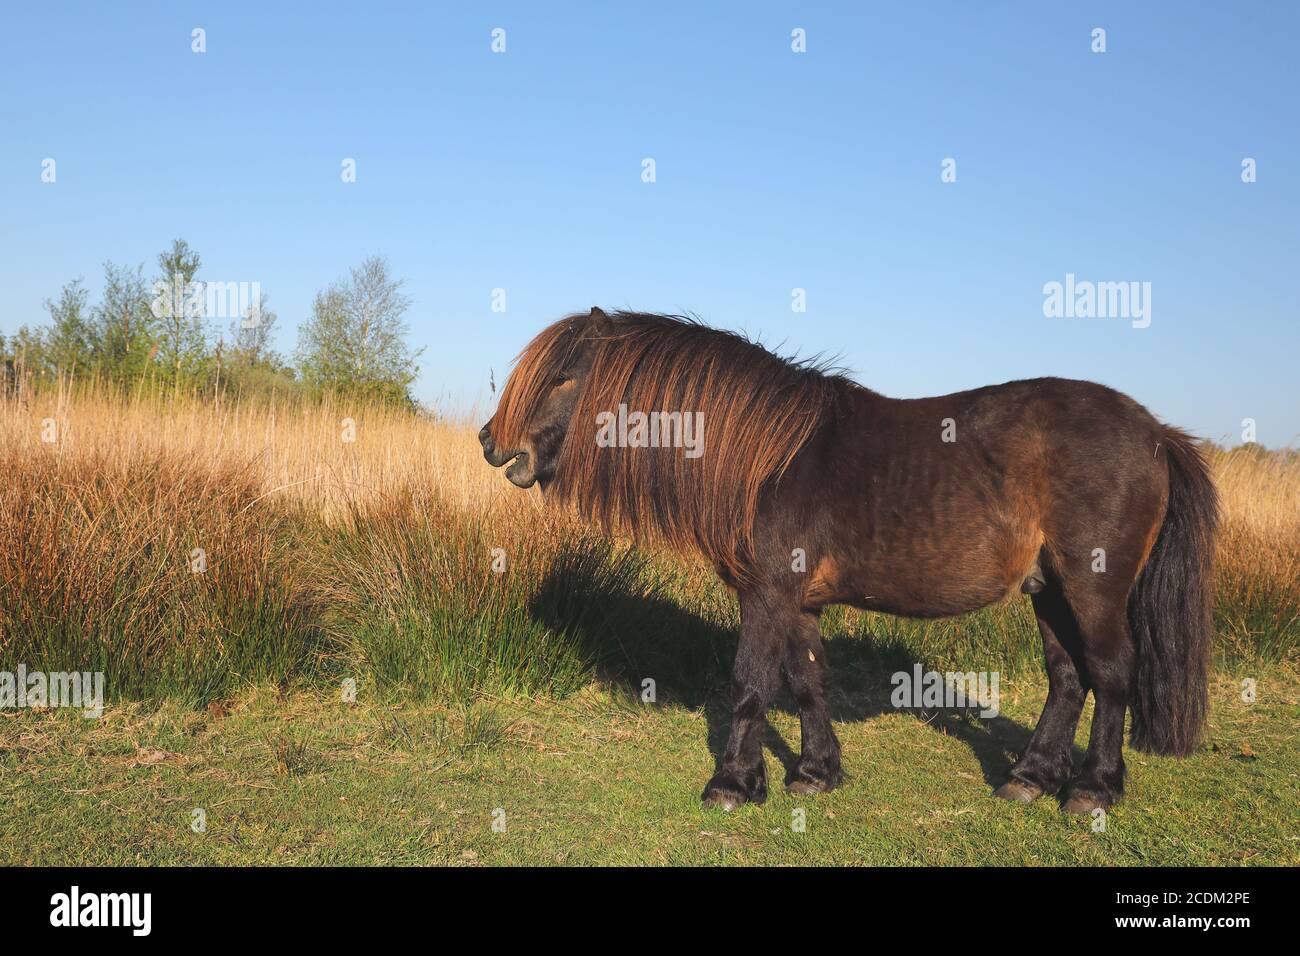 Shetland pony (Equus przewalskii f. caballus), stands at the edge of a reed zone, Netherlands, Frisia, Alde Feanen National Park Stock Photo